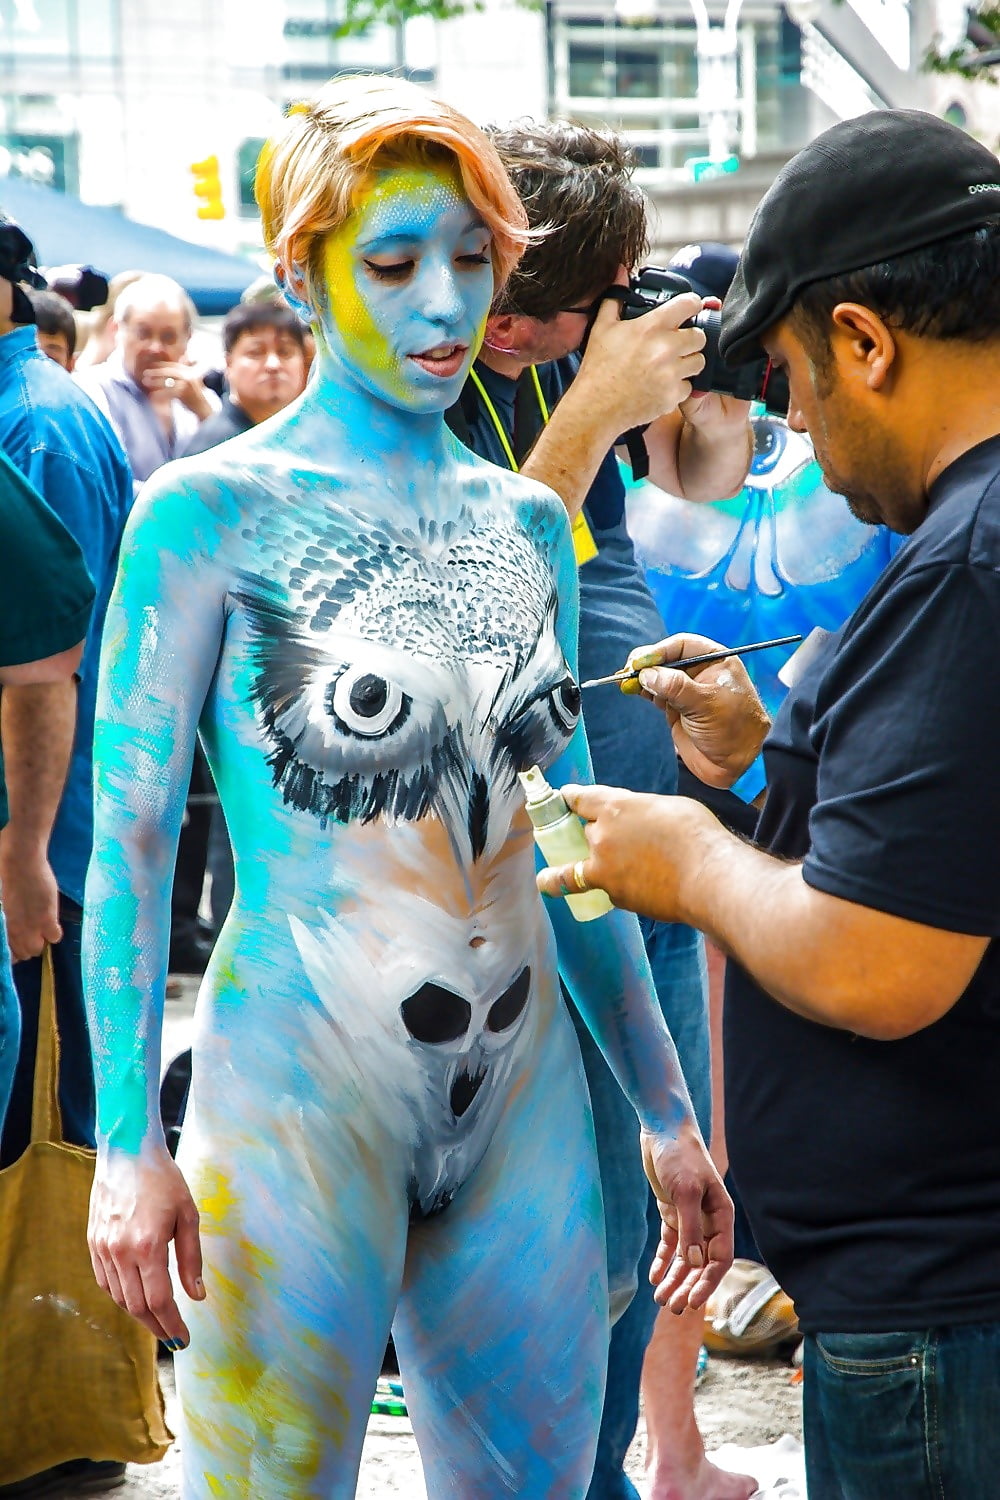 Nude body painting in pictures